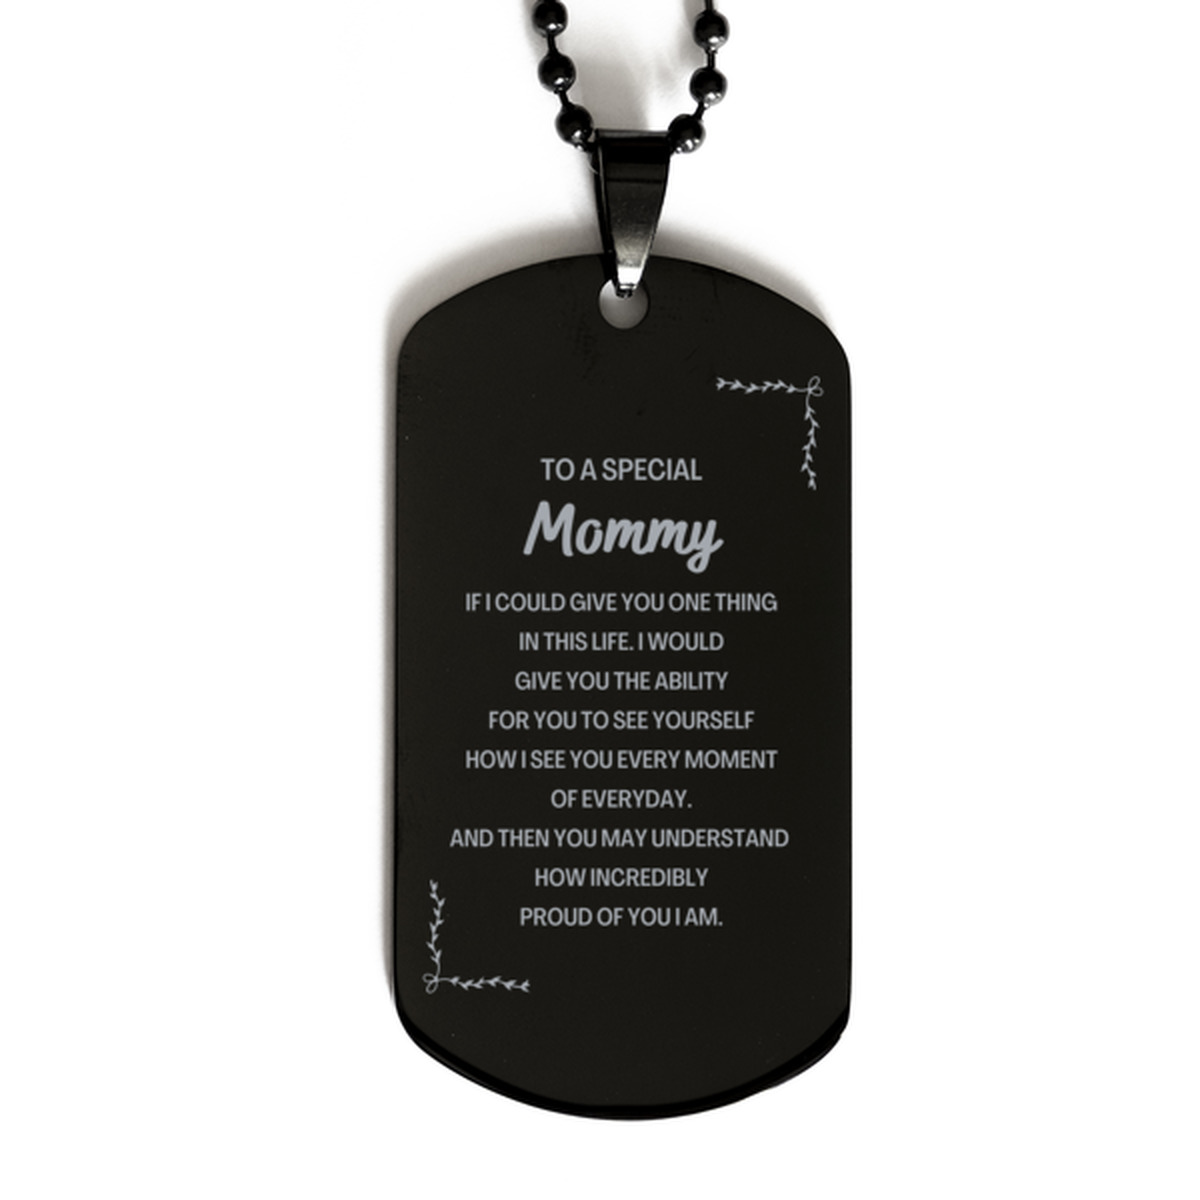 To My Mommy Black Dog Tag, Gifts For Mommy Engraved, Inspirational Gifts for Christmas Birthday, Epic Gifts for Mommy To A Special Mommy how incredibly proud of you I am